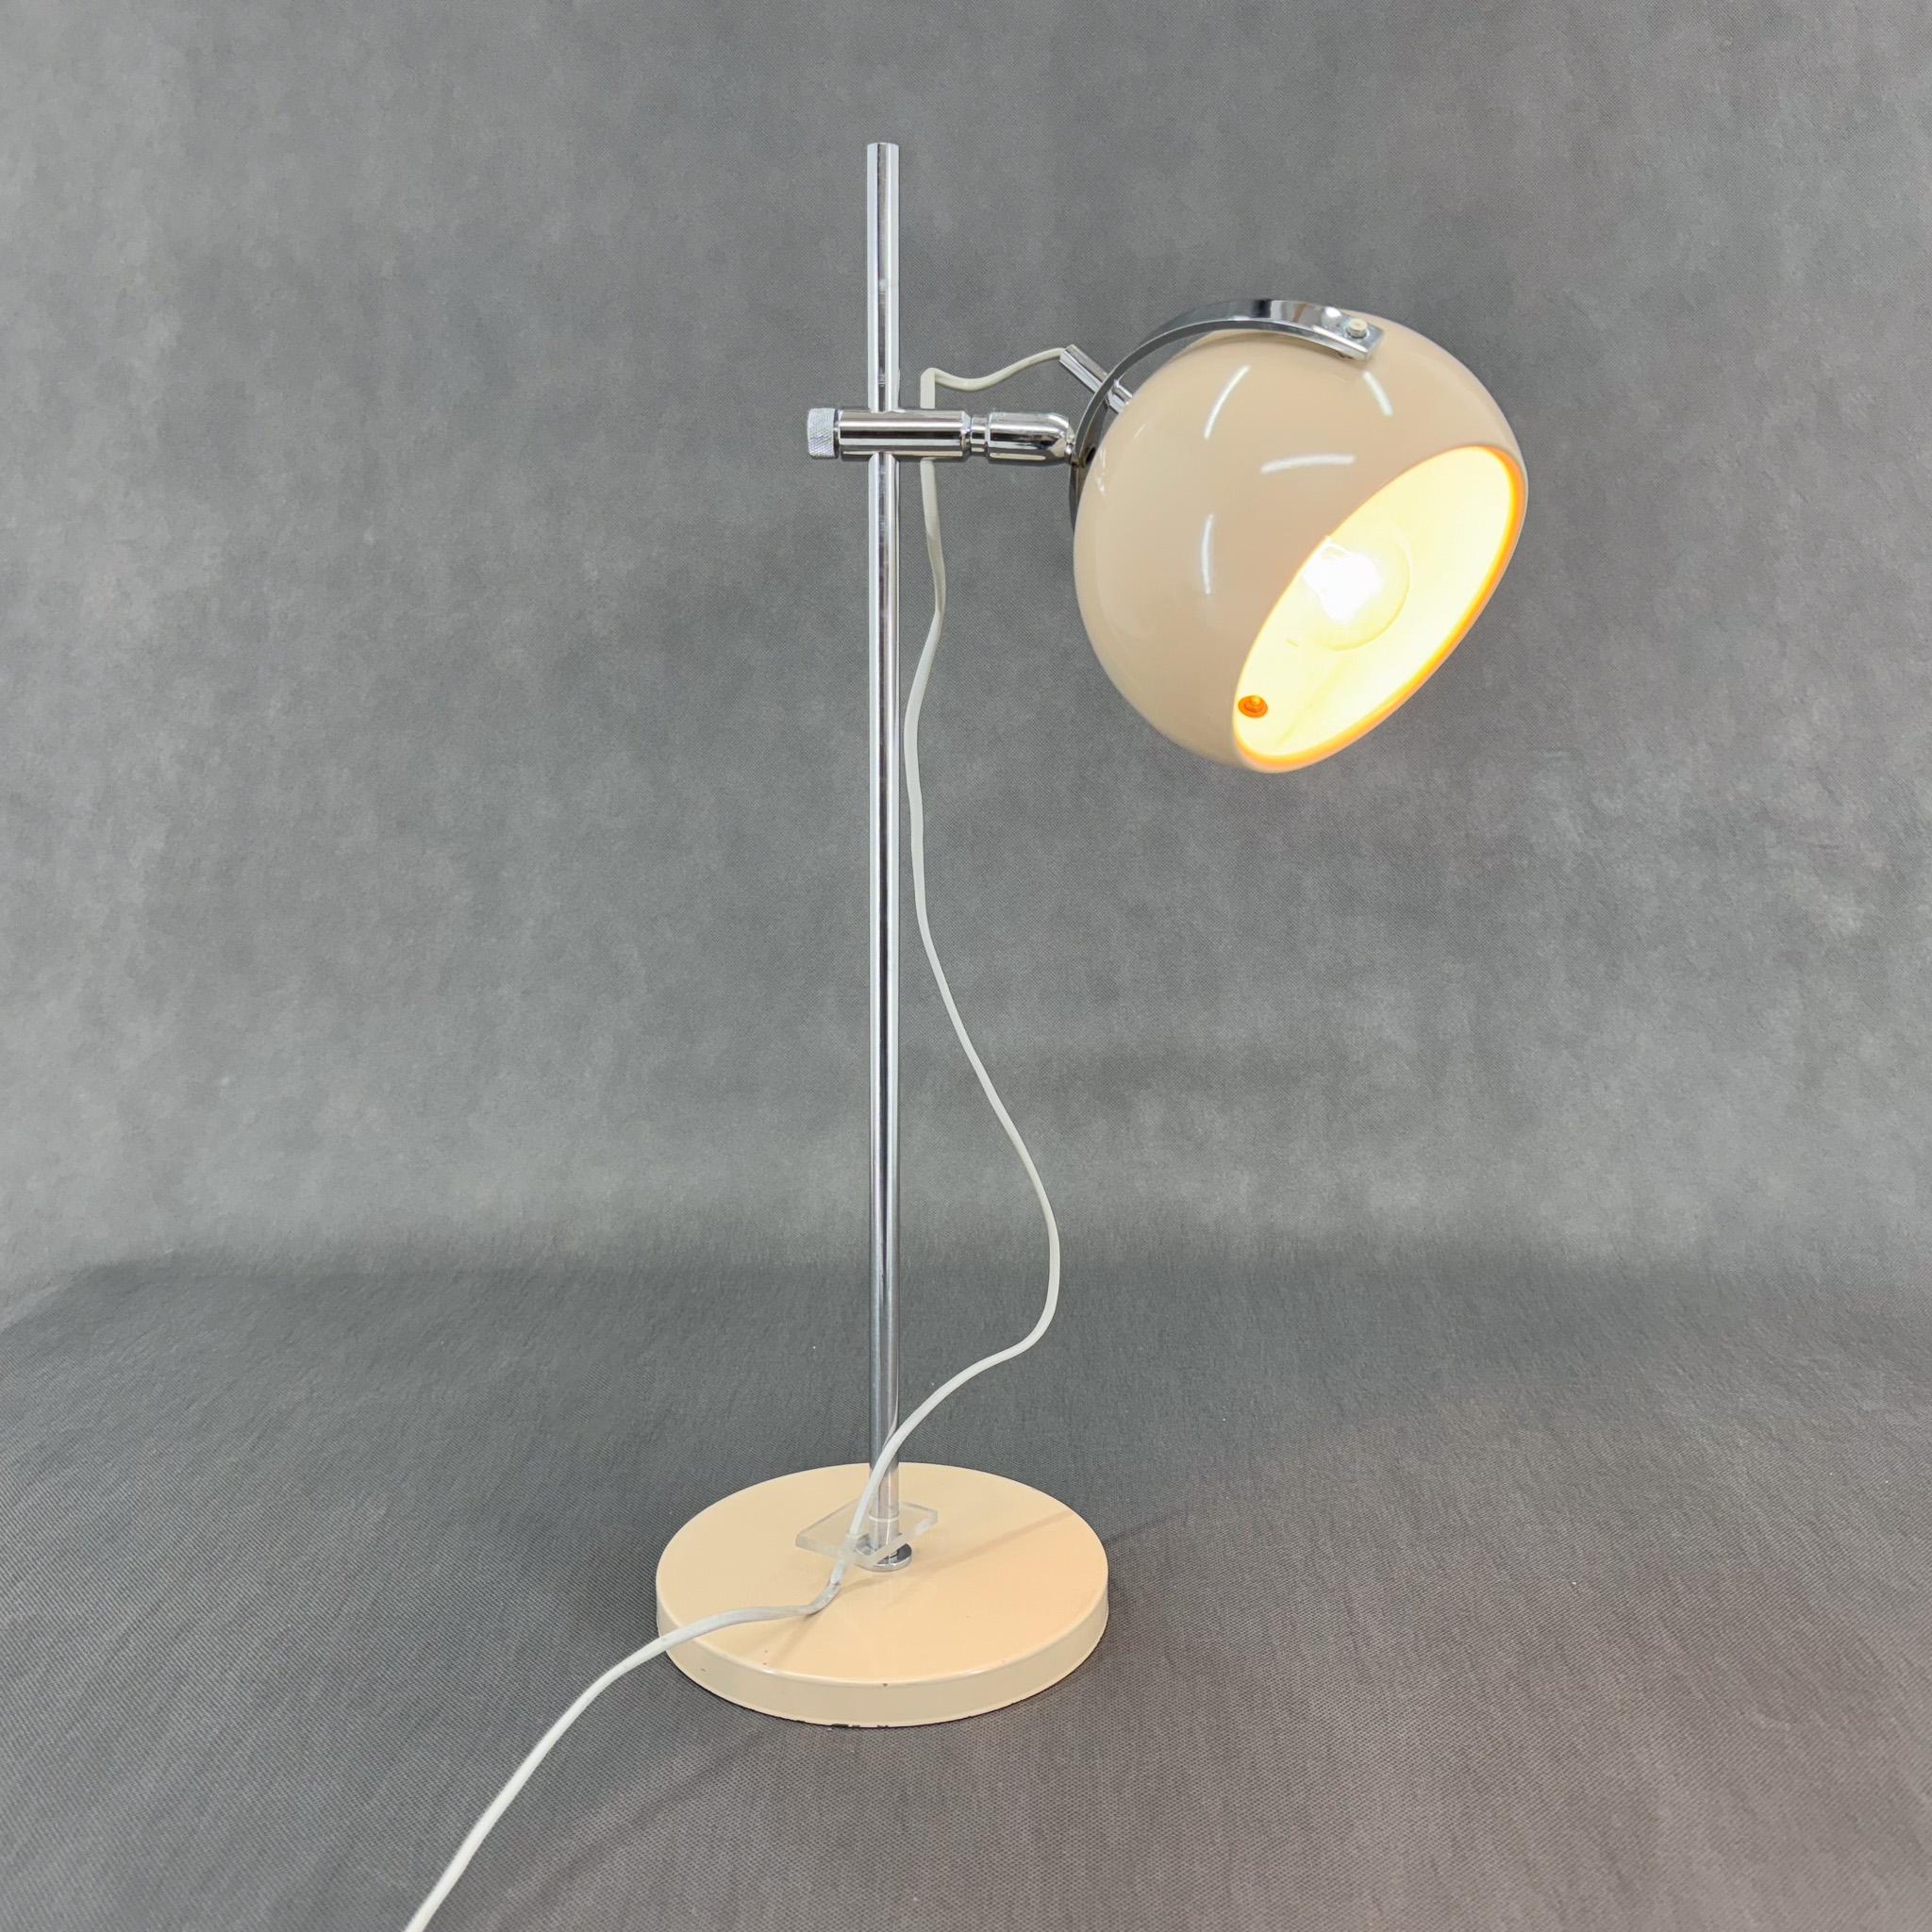 Vintage Space age Italian table lamp. The lampshade resembles an eyeball and is adjustable in all directions, up, down and sideways.